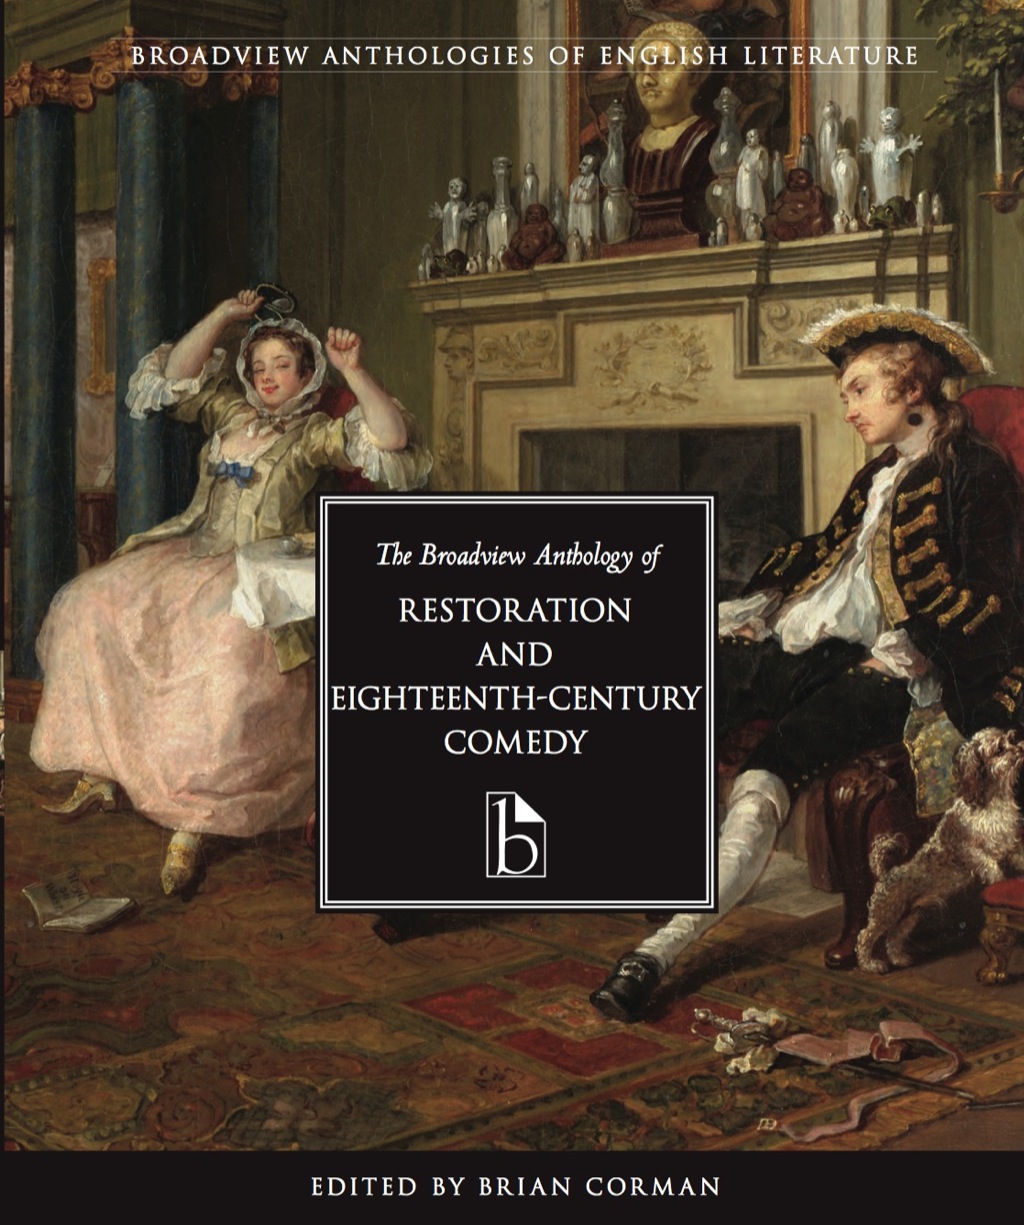 The Broadview Anthology of Restoration and Eighteenth-Century Comedy (eBook) - Brian Corman (editor)